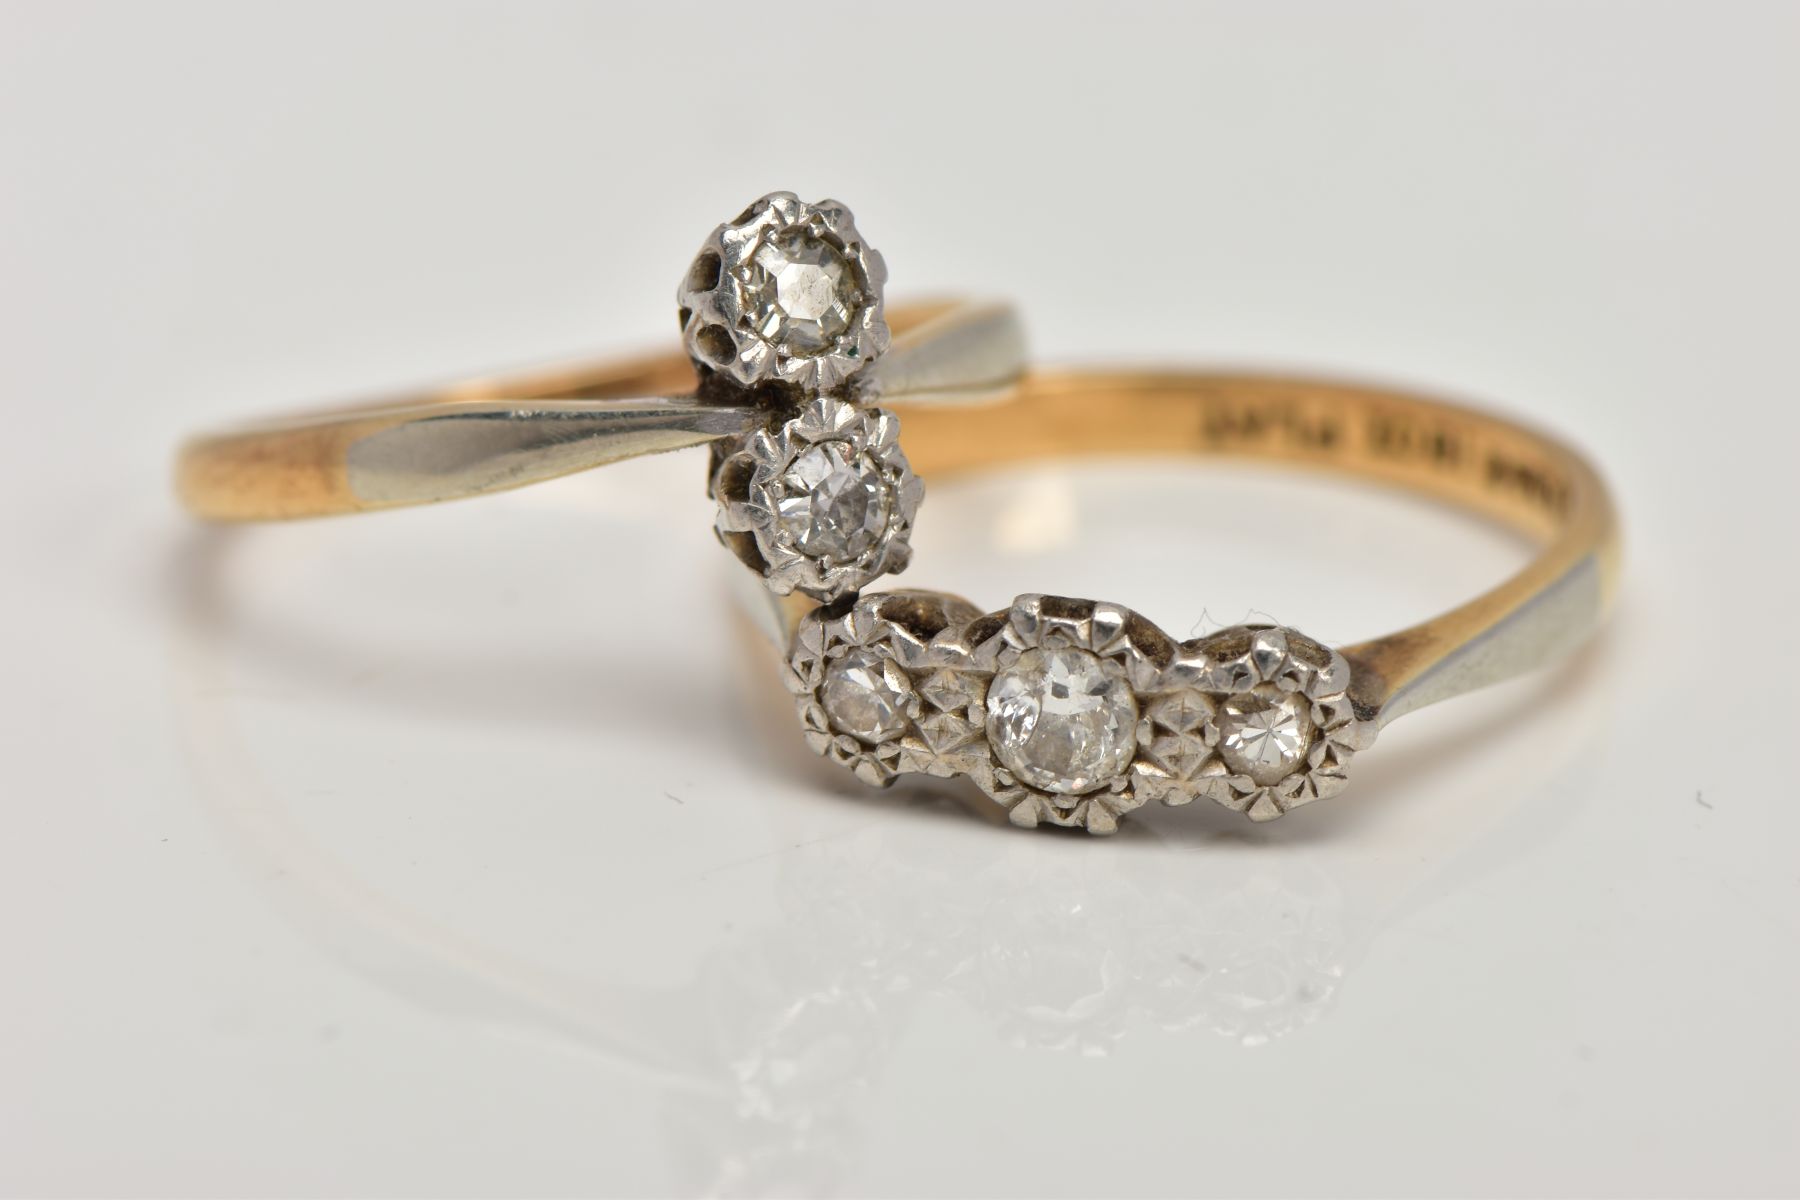 TWO DIAMOND RINGS, the first designed as three graduated brilliant cut diamonds, ring size M 1/2,